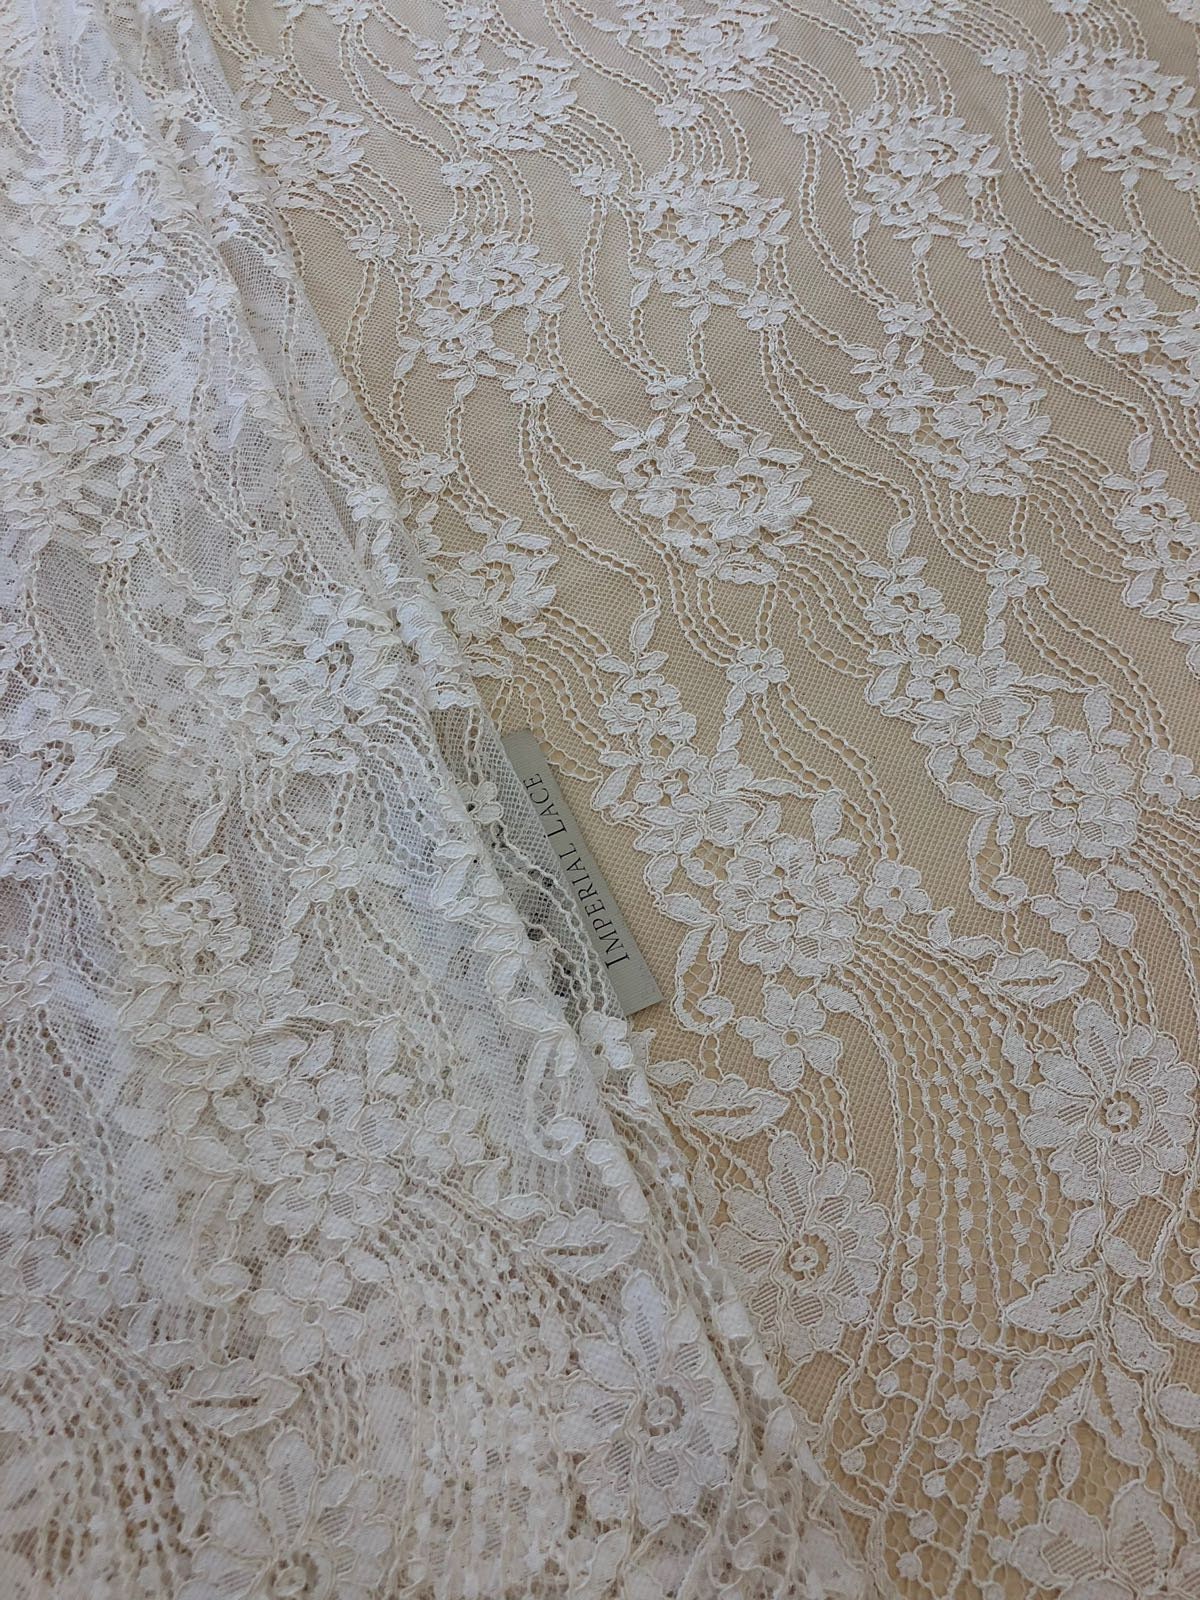 Cream Lace Fabric French Lace Embroidered Lace Wedding | Etsy